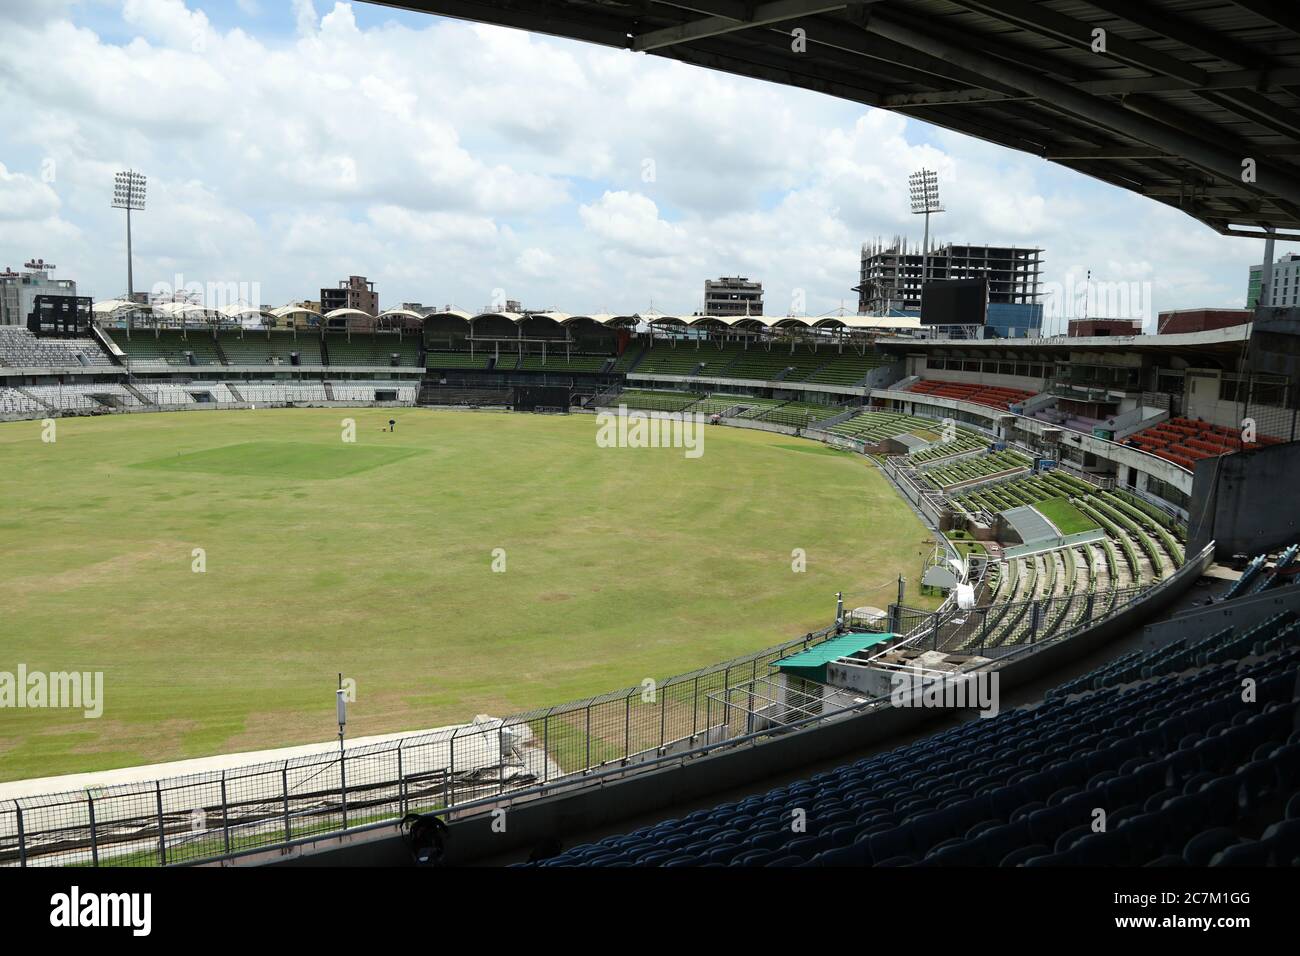 Dhaka, Bangladesh. 18th July, 2020. View of the Sher-e-Bangla National Cricket Stadium (Mirpur Stadium) as the BCB is contemplating plans to start training while maintaining safety regulations.A total of nine interested players, who submitted their names to the Bangladesh Cricket Board (BCB), will be resuming individual training in different BCB-run training facilities across the country. Credit: SOPA Images Limited/Alamy Live News Stock Photo